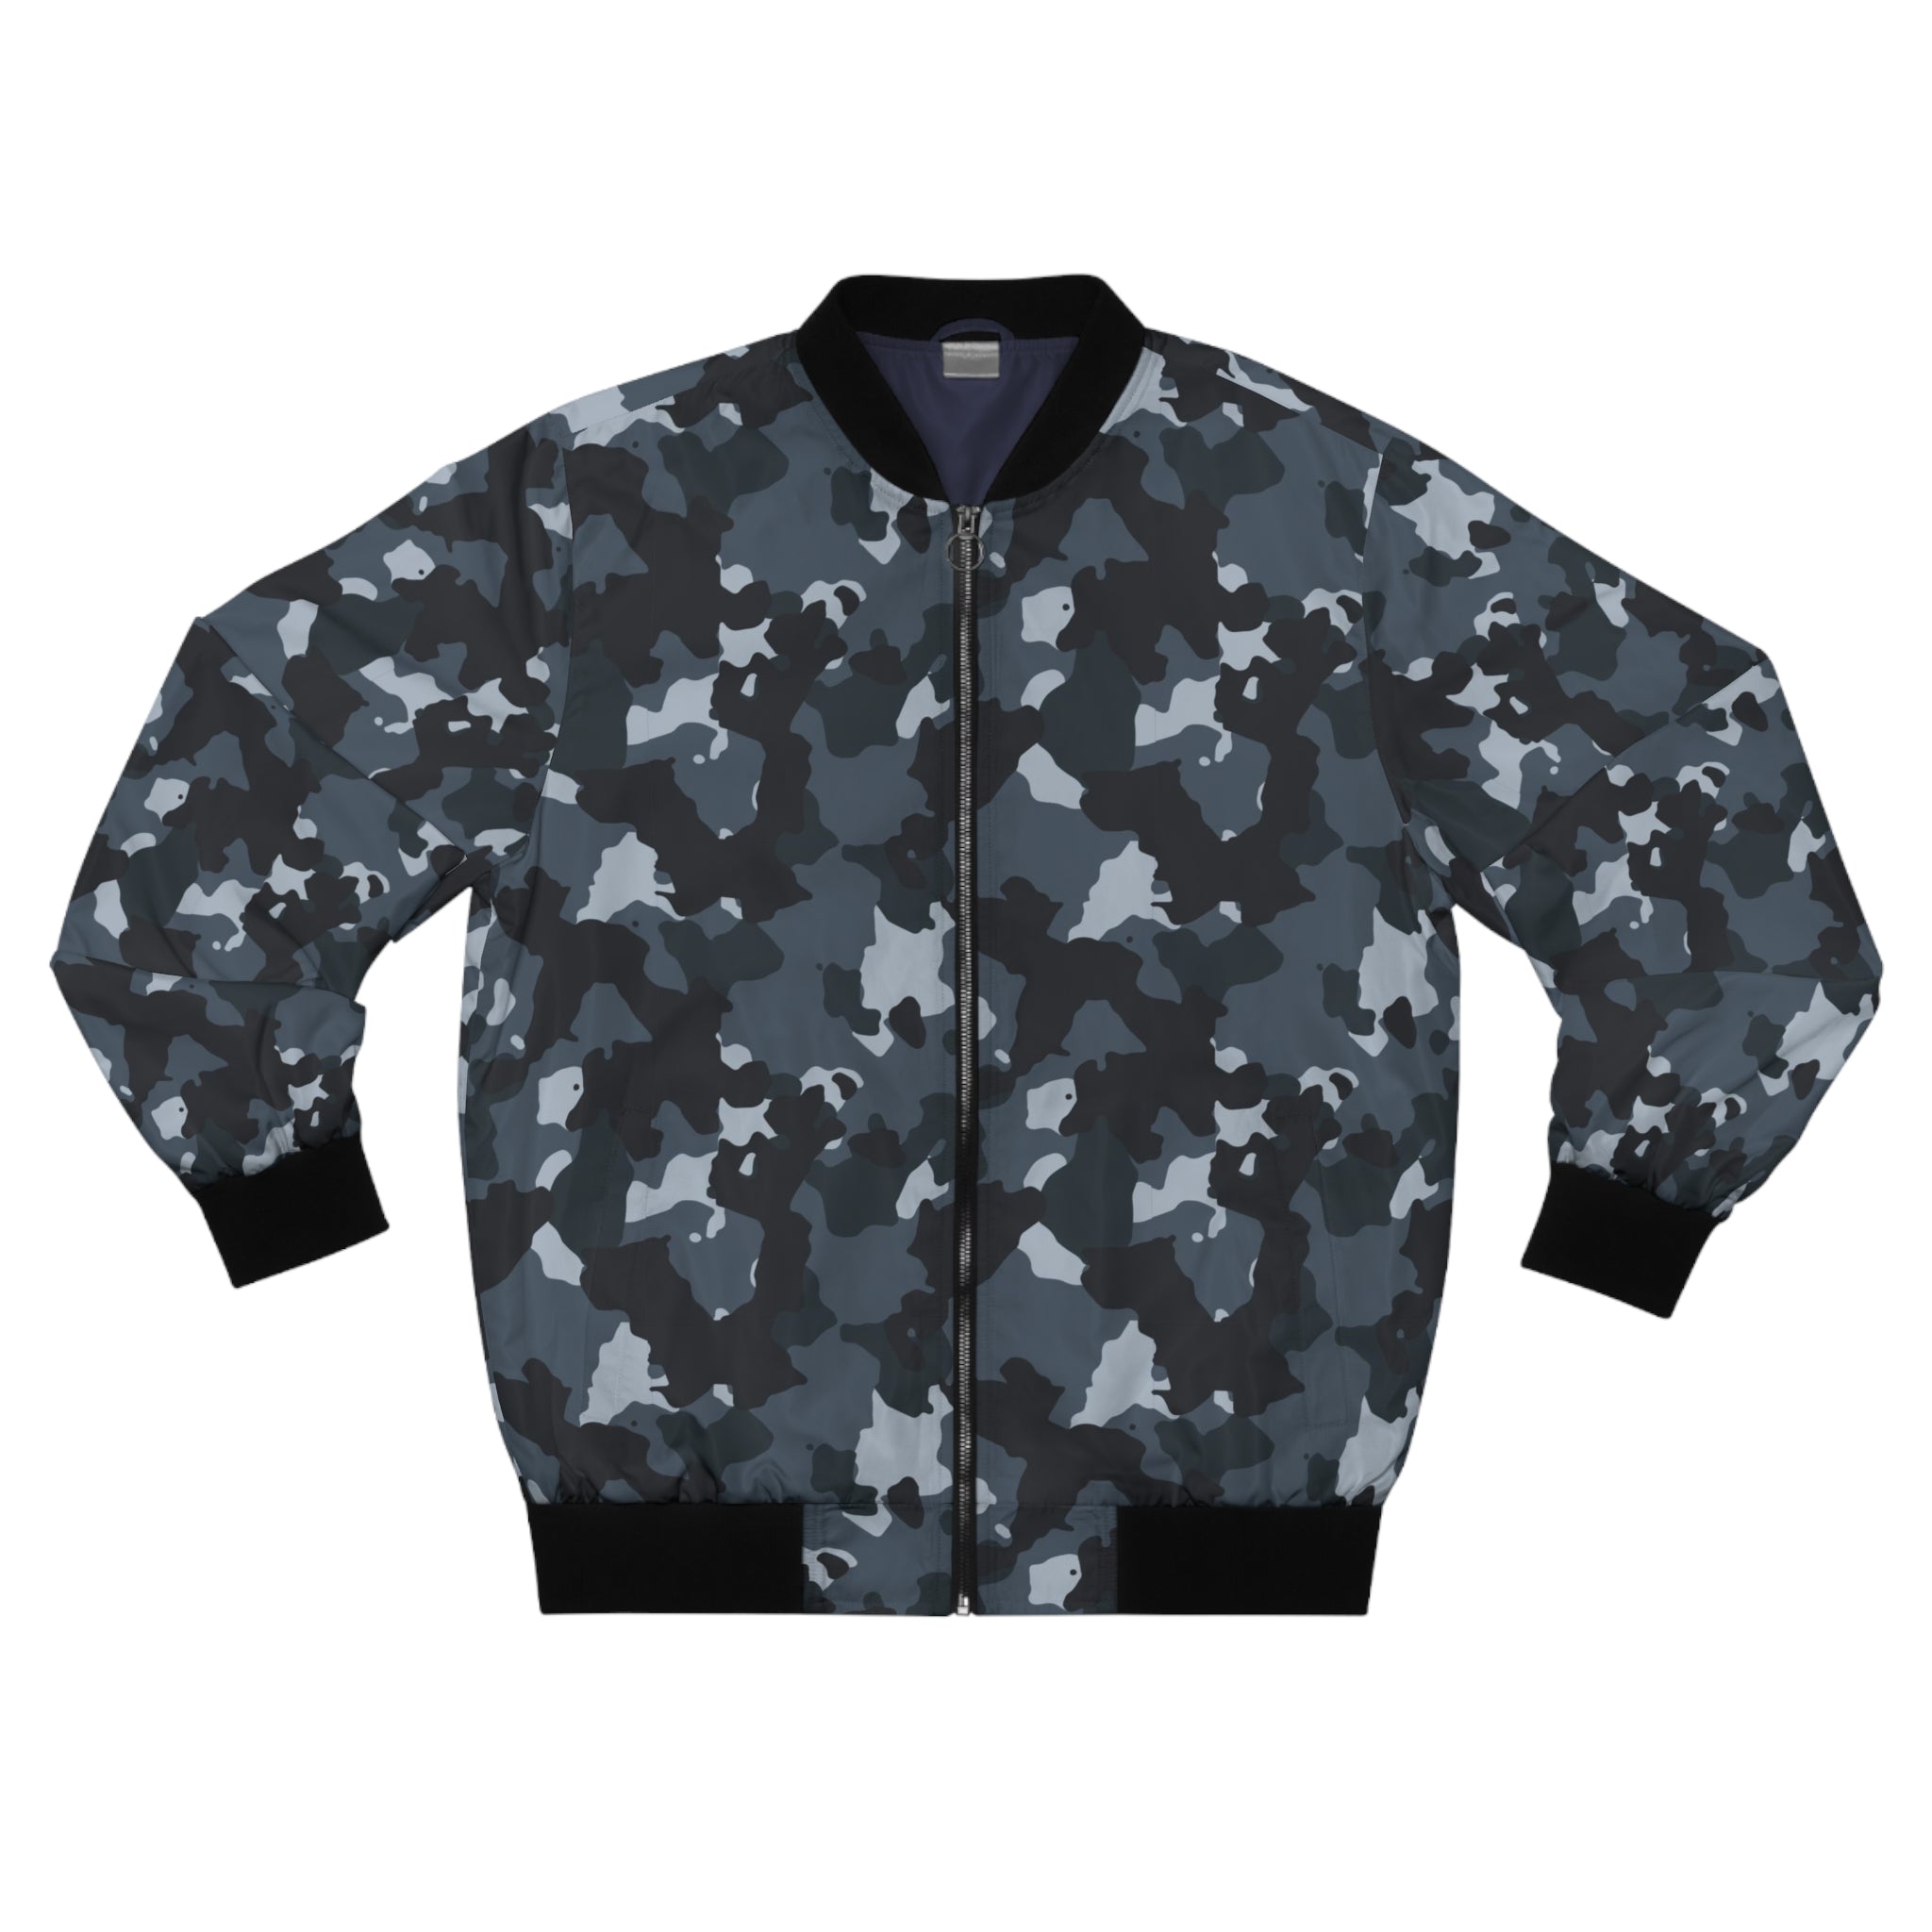 Men's Classic Winter Soldier Military Camouflage Fashion Bomber Jacket